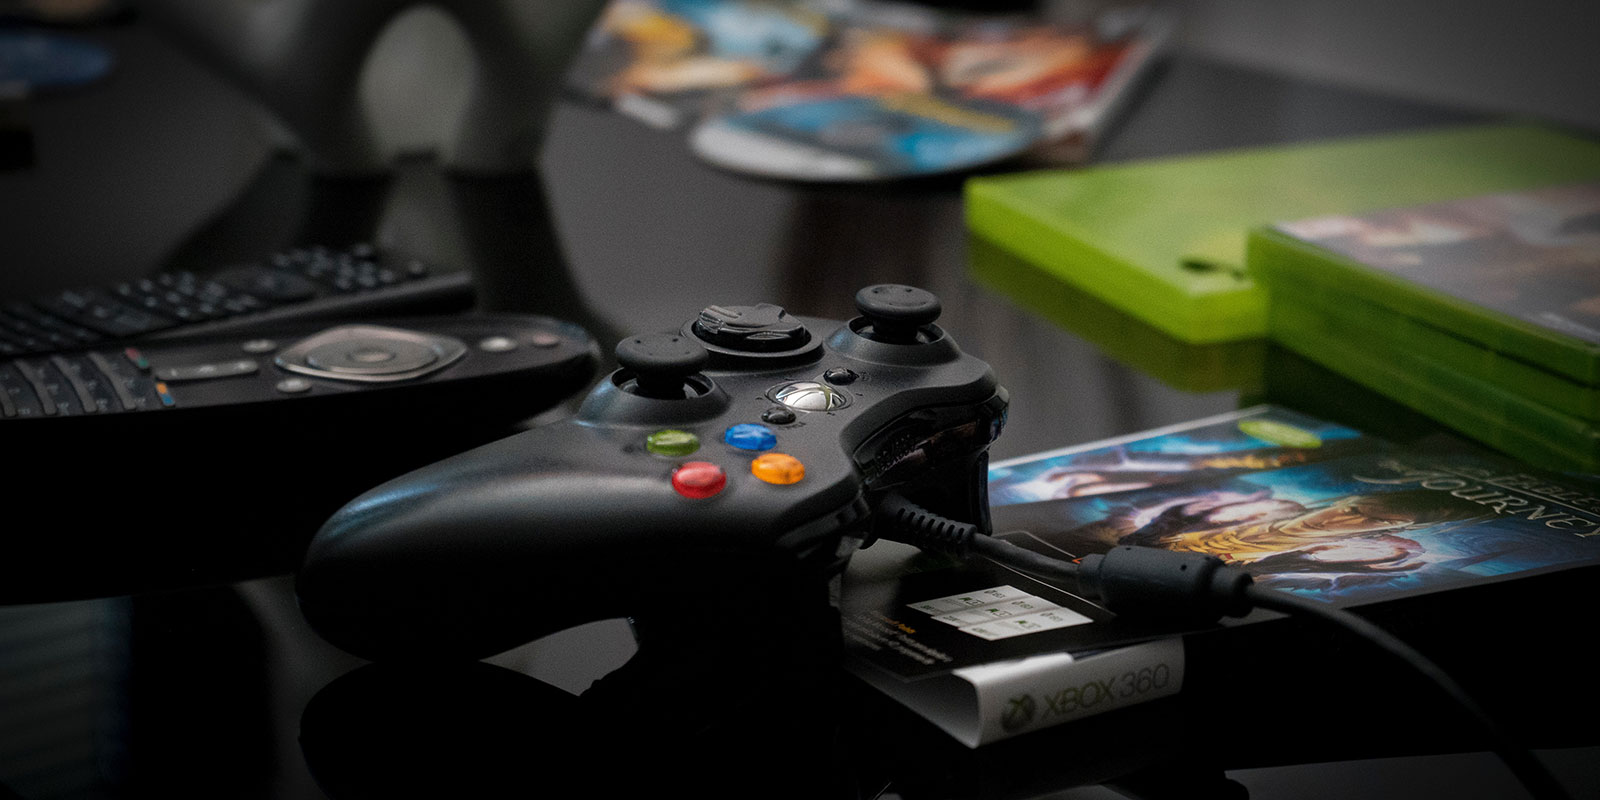 What Makes a Gaming Console Your Favorite?